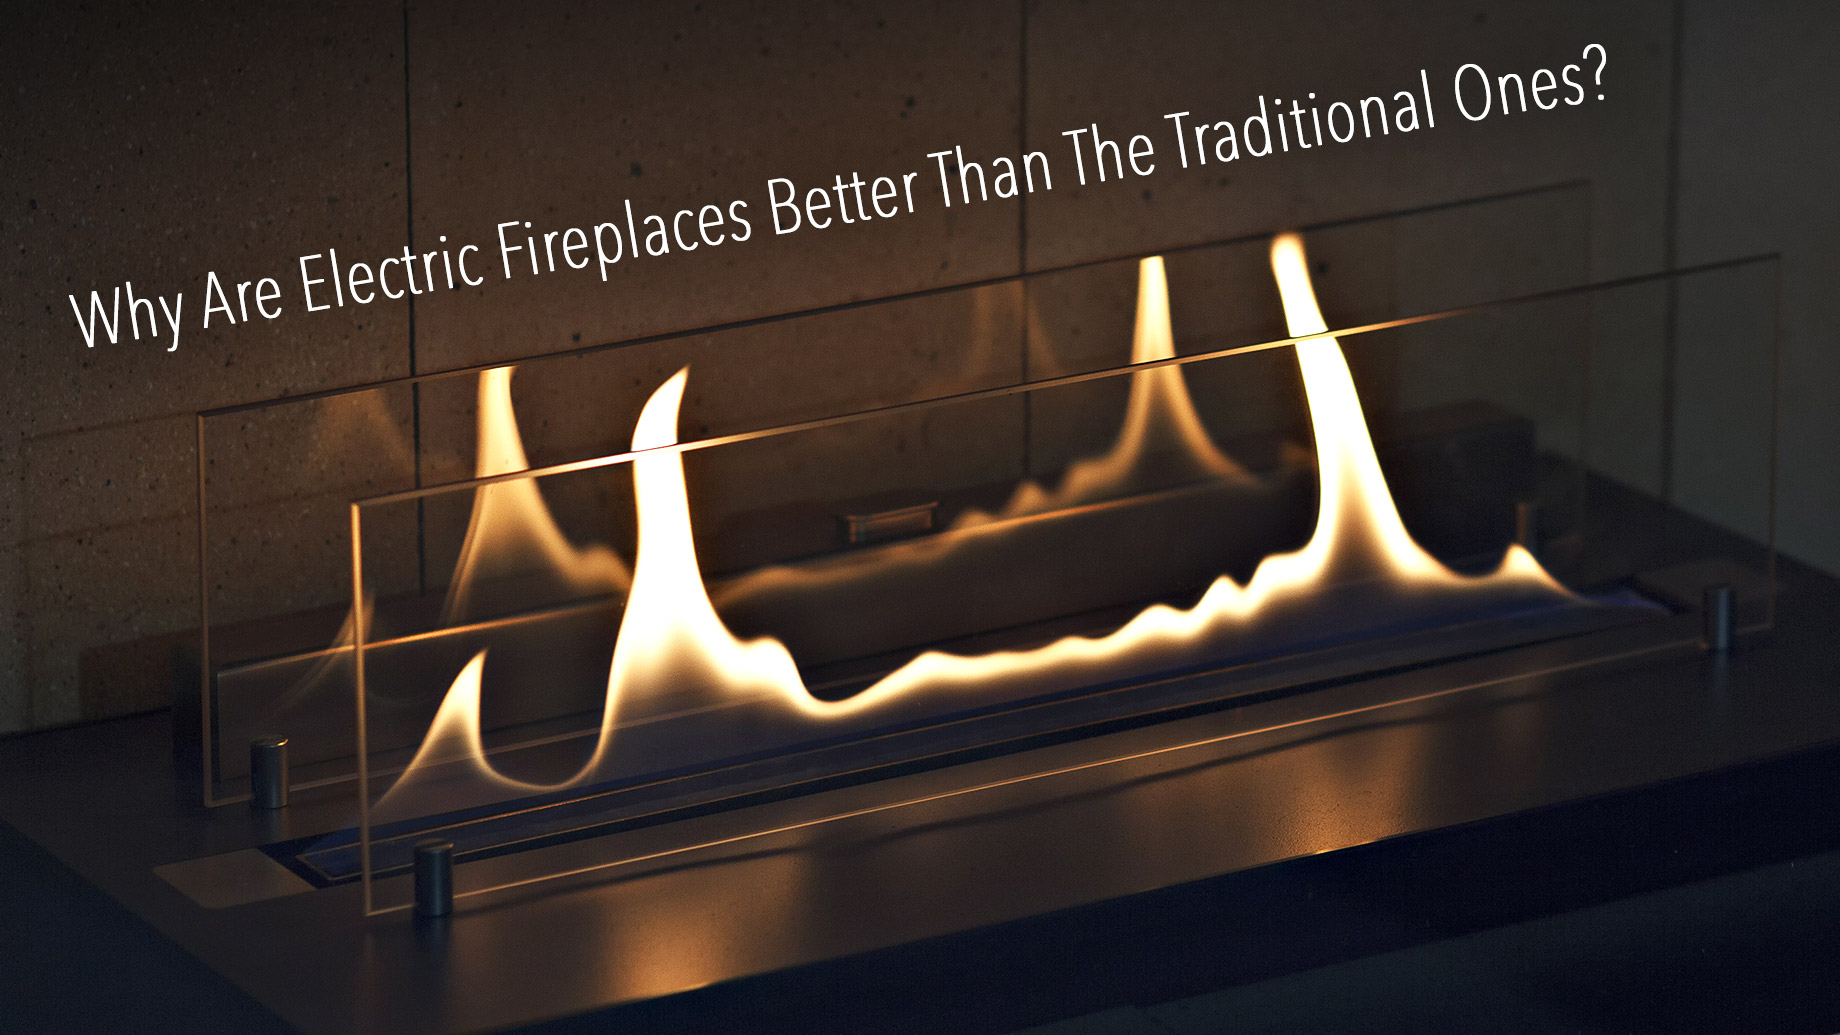 Why Are Electric Fireplaces Better Than The Traditional Ones? Everything You Need To Know